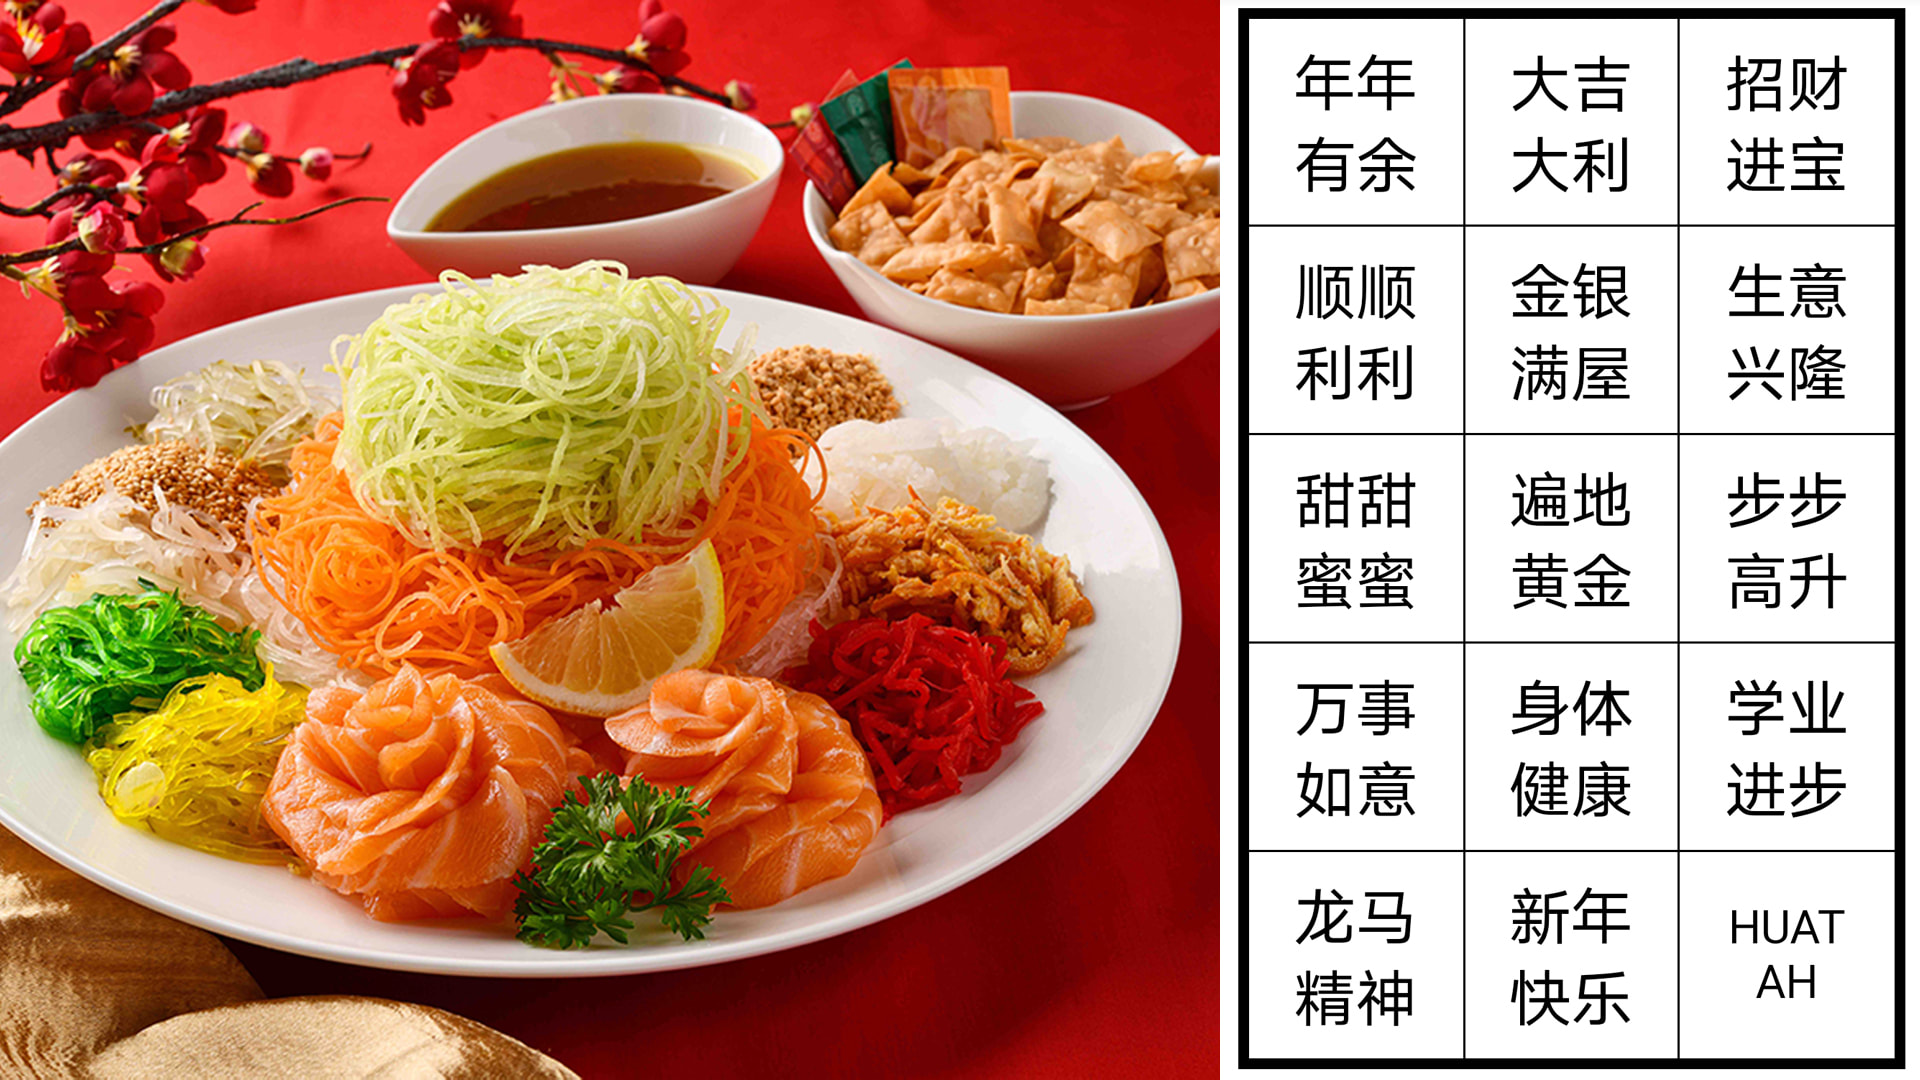 Can’t Holler “Huat Ah!” While Tossing Yusheng? This App Will Do It For You